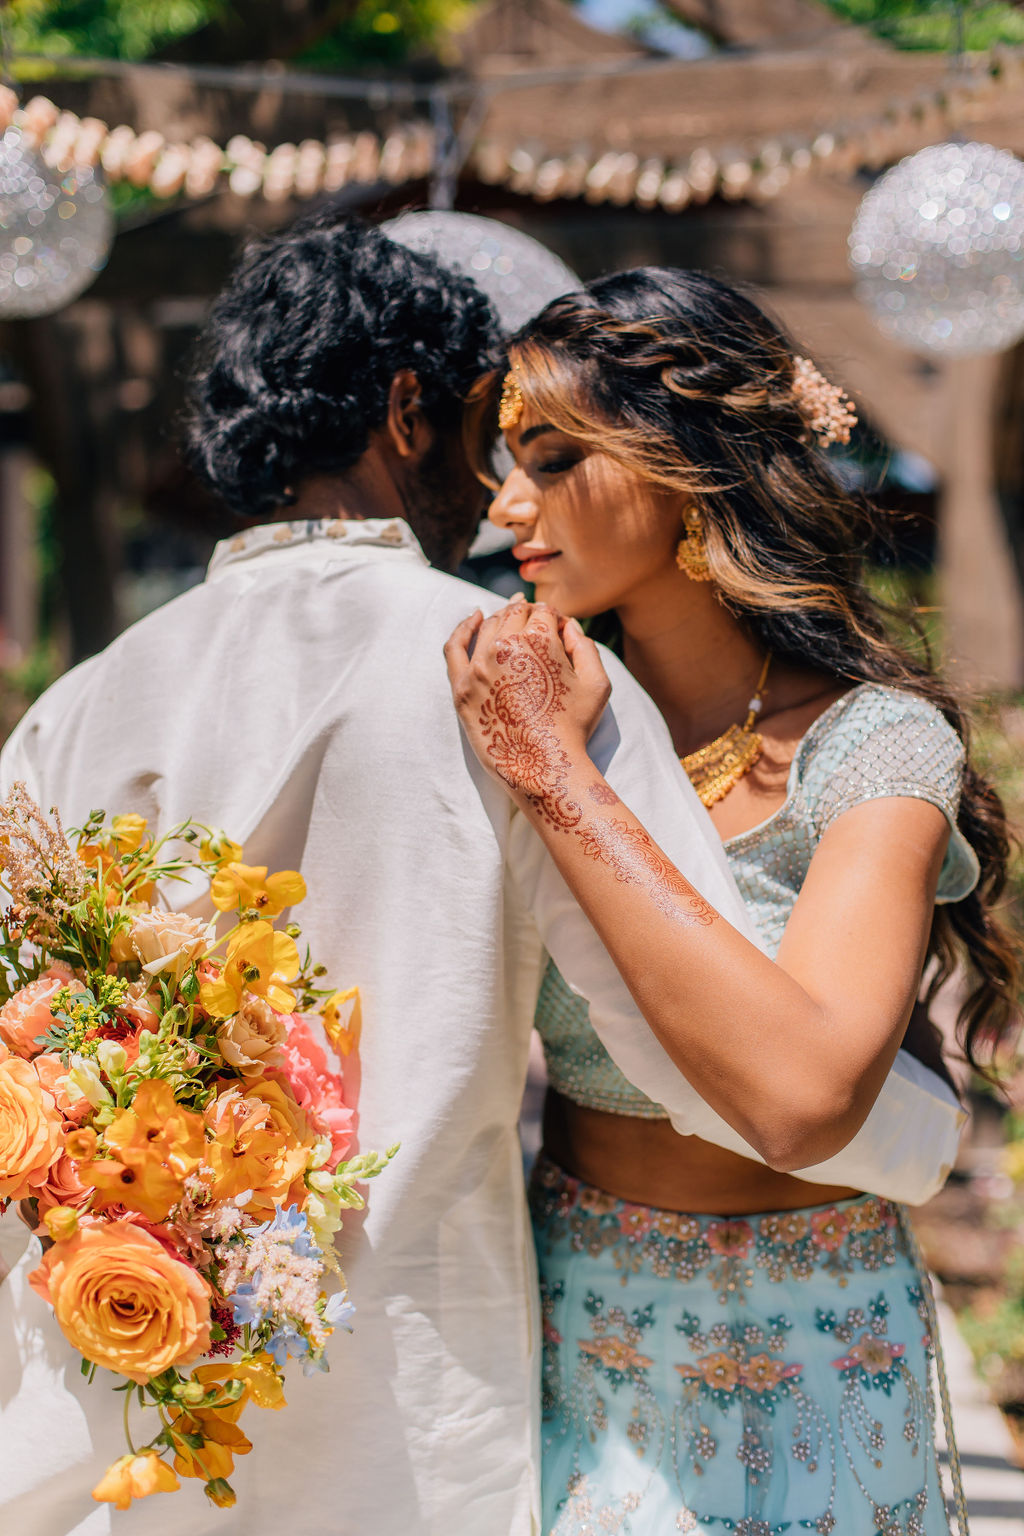 Kaushay & Co. are your wedding planning experts for northern Utah brides; they are here to help you plan the perfect day from start to finish. #slceventplanner #parkcitywedding #luxuryweddingplanner #utahcountyweddingplanner #highendwedding #utahweddingexpert